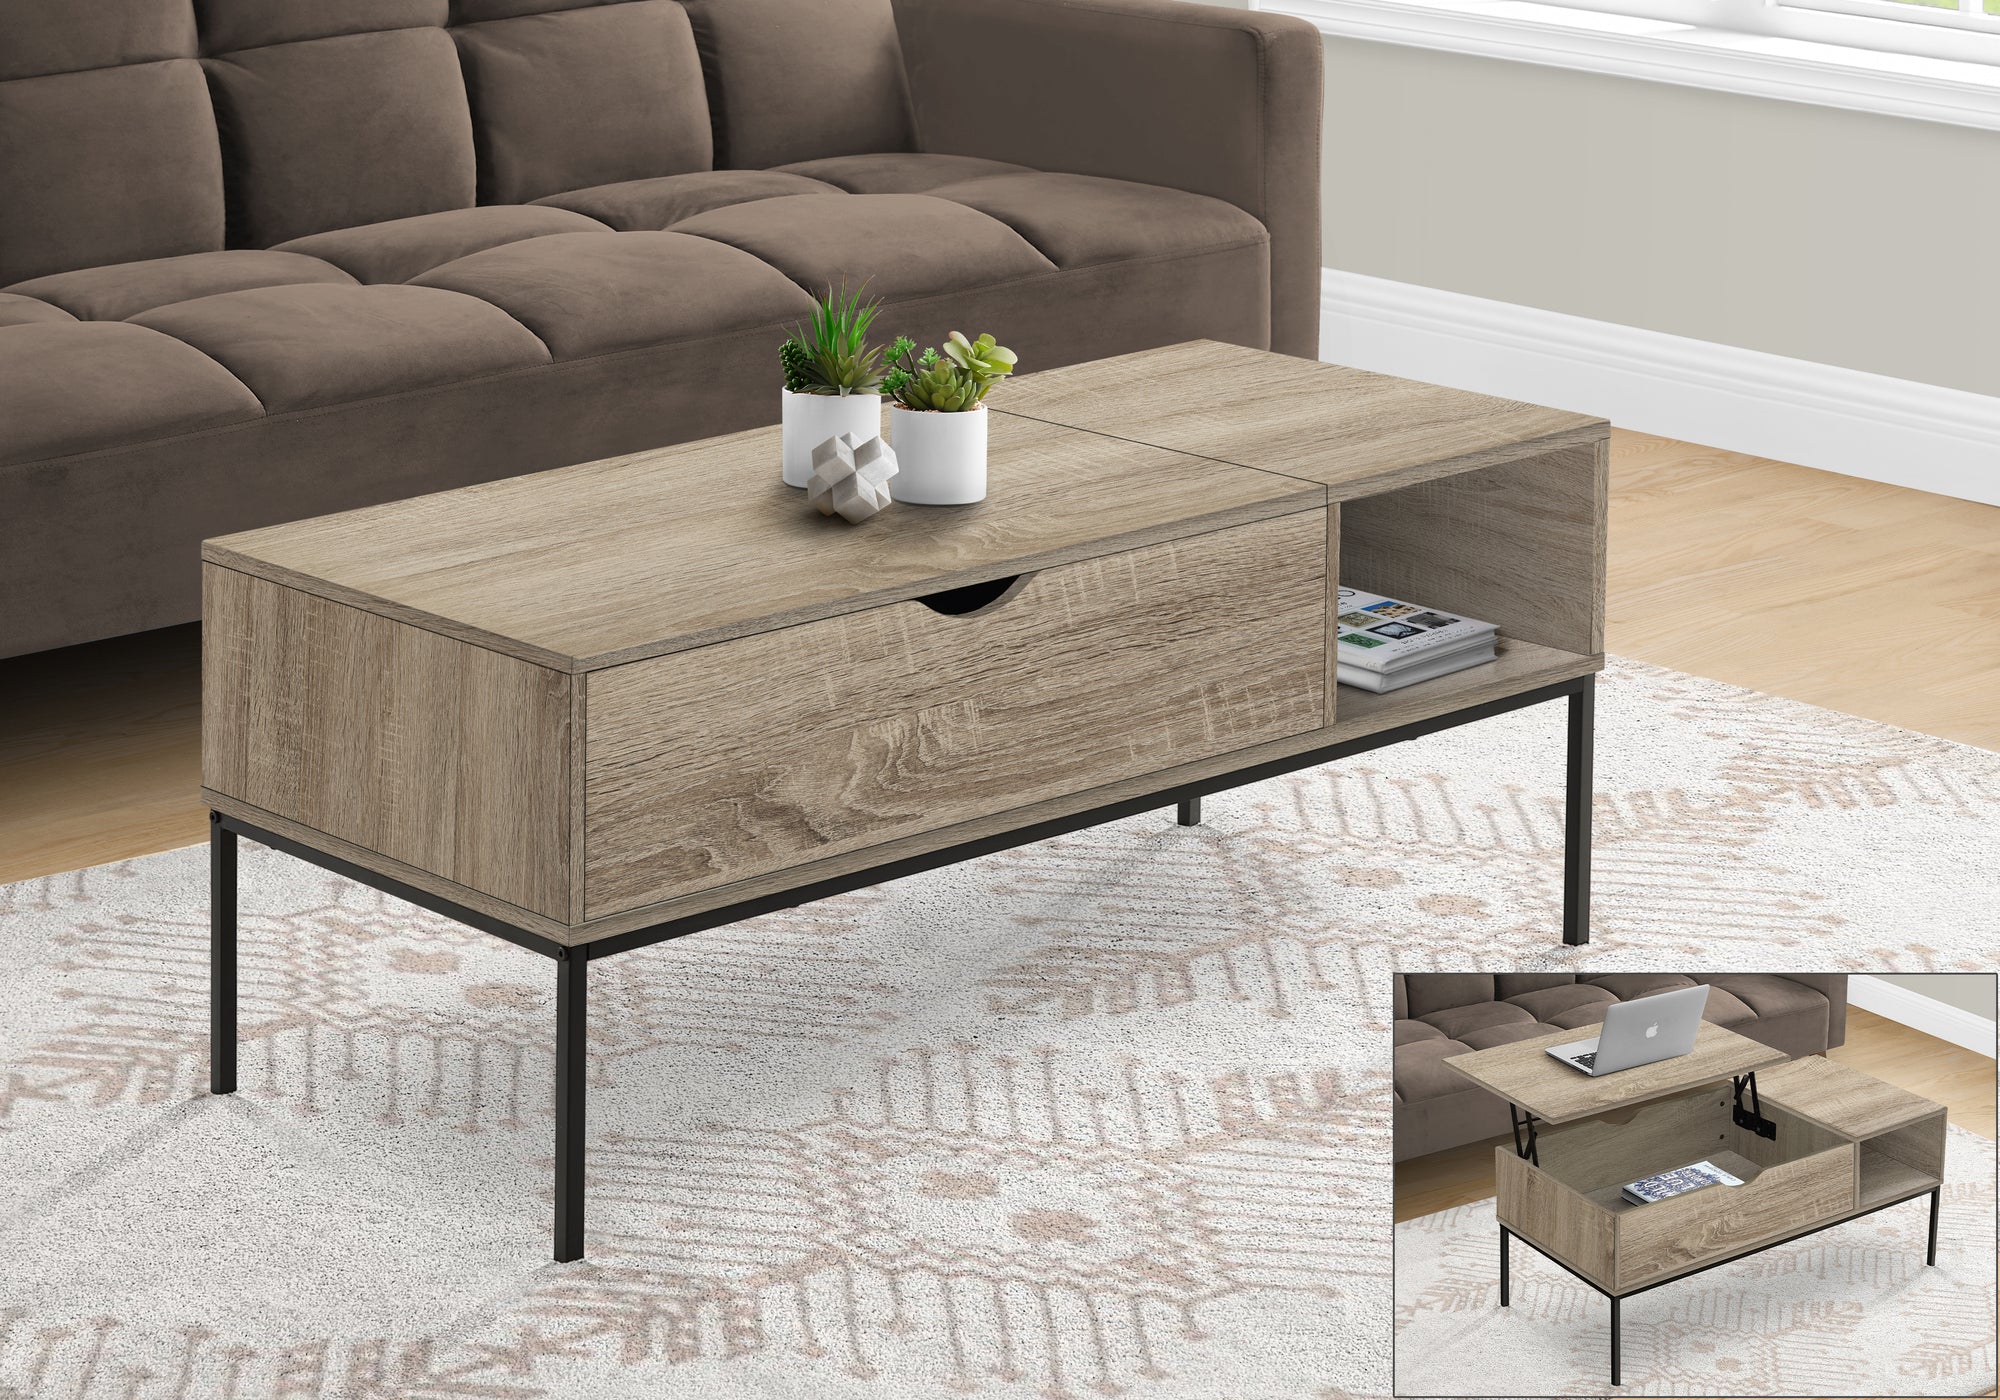 MN-693806    Coffee Table, 42" L, Rectangular, Cocktail, Lift-top, Dark Taupe, Black Metal, Contemporary, Modern